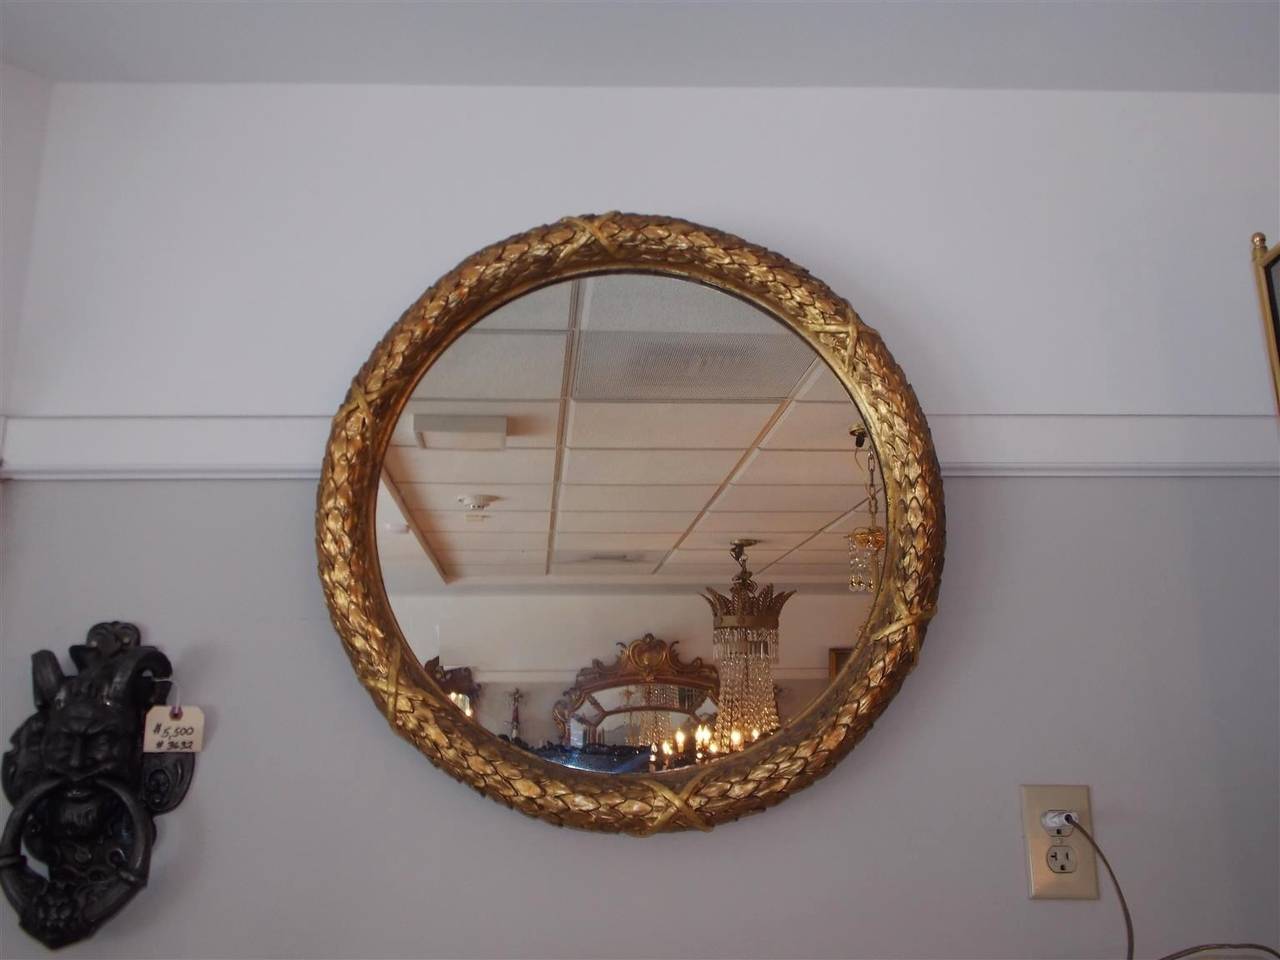 French gilt carved wood circular mirror with intertwined decorative floral and cross hatching motif. Mirror retains the original glass. Early 19th century.